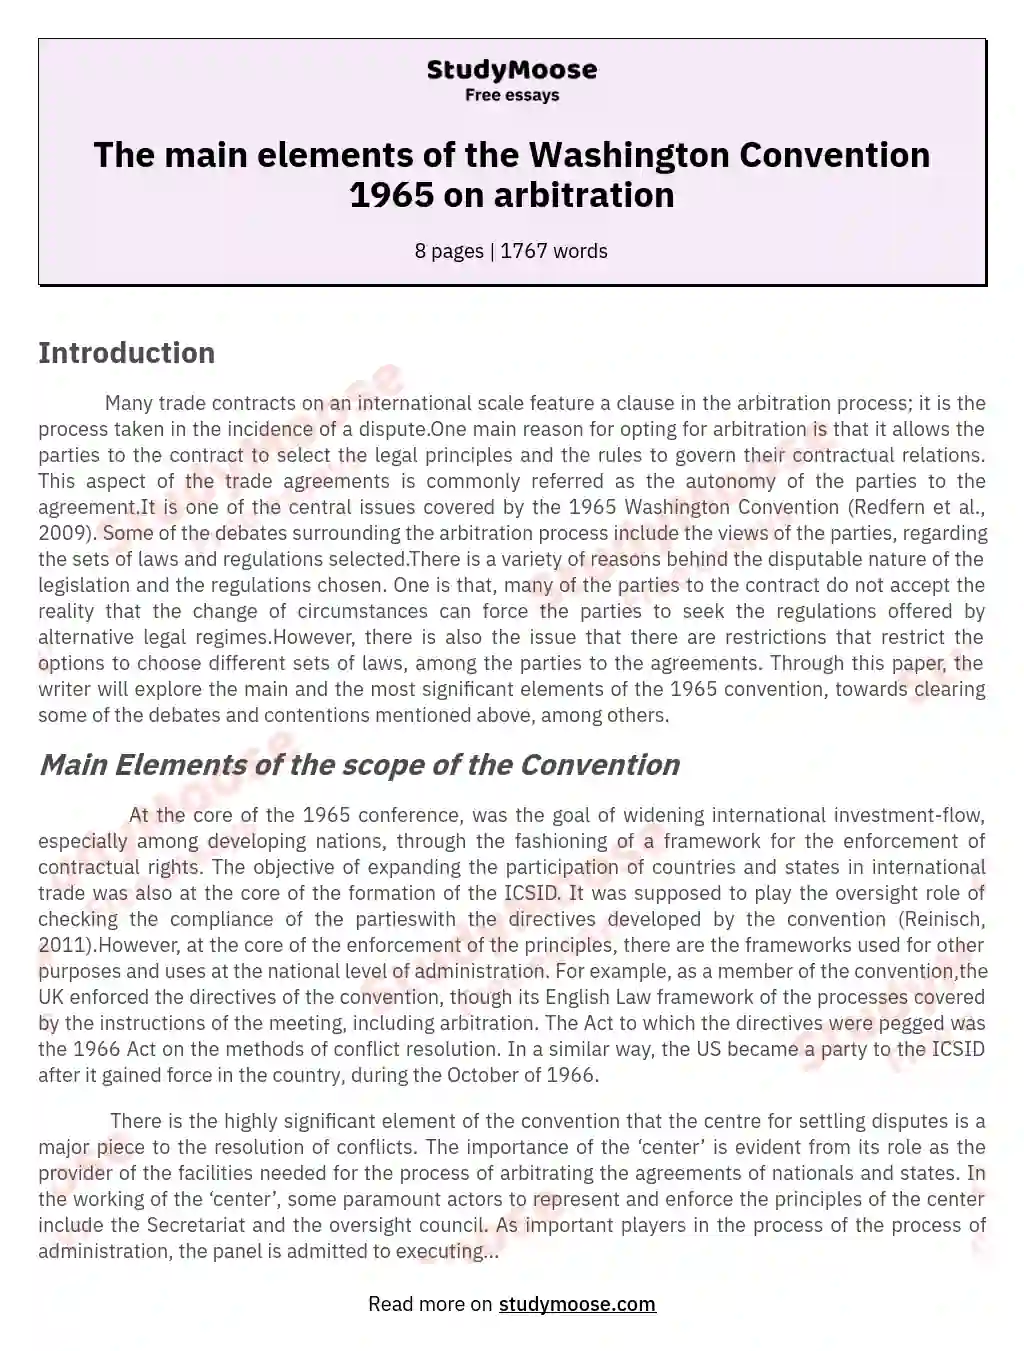 The main elements of the Washington Convention 1965 on arbitration essay